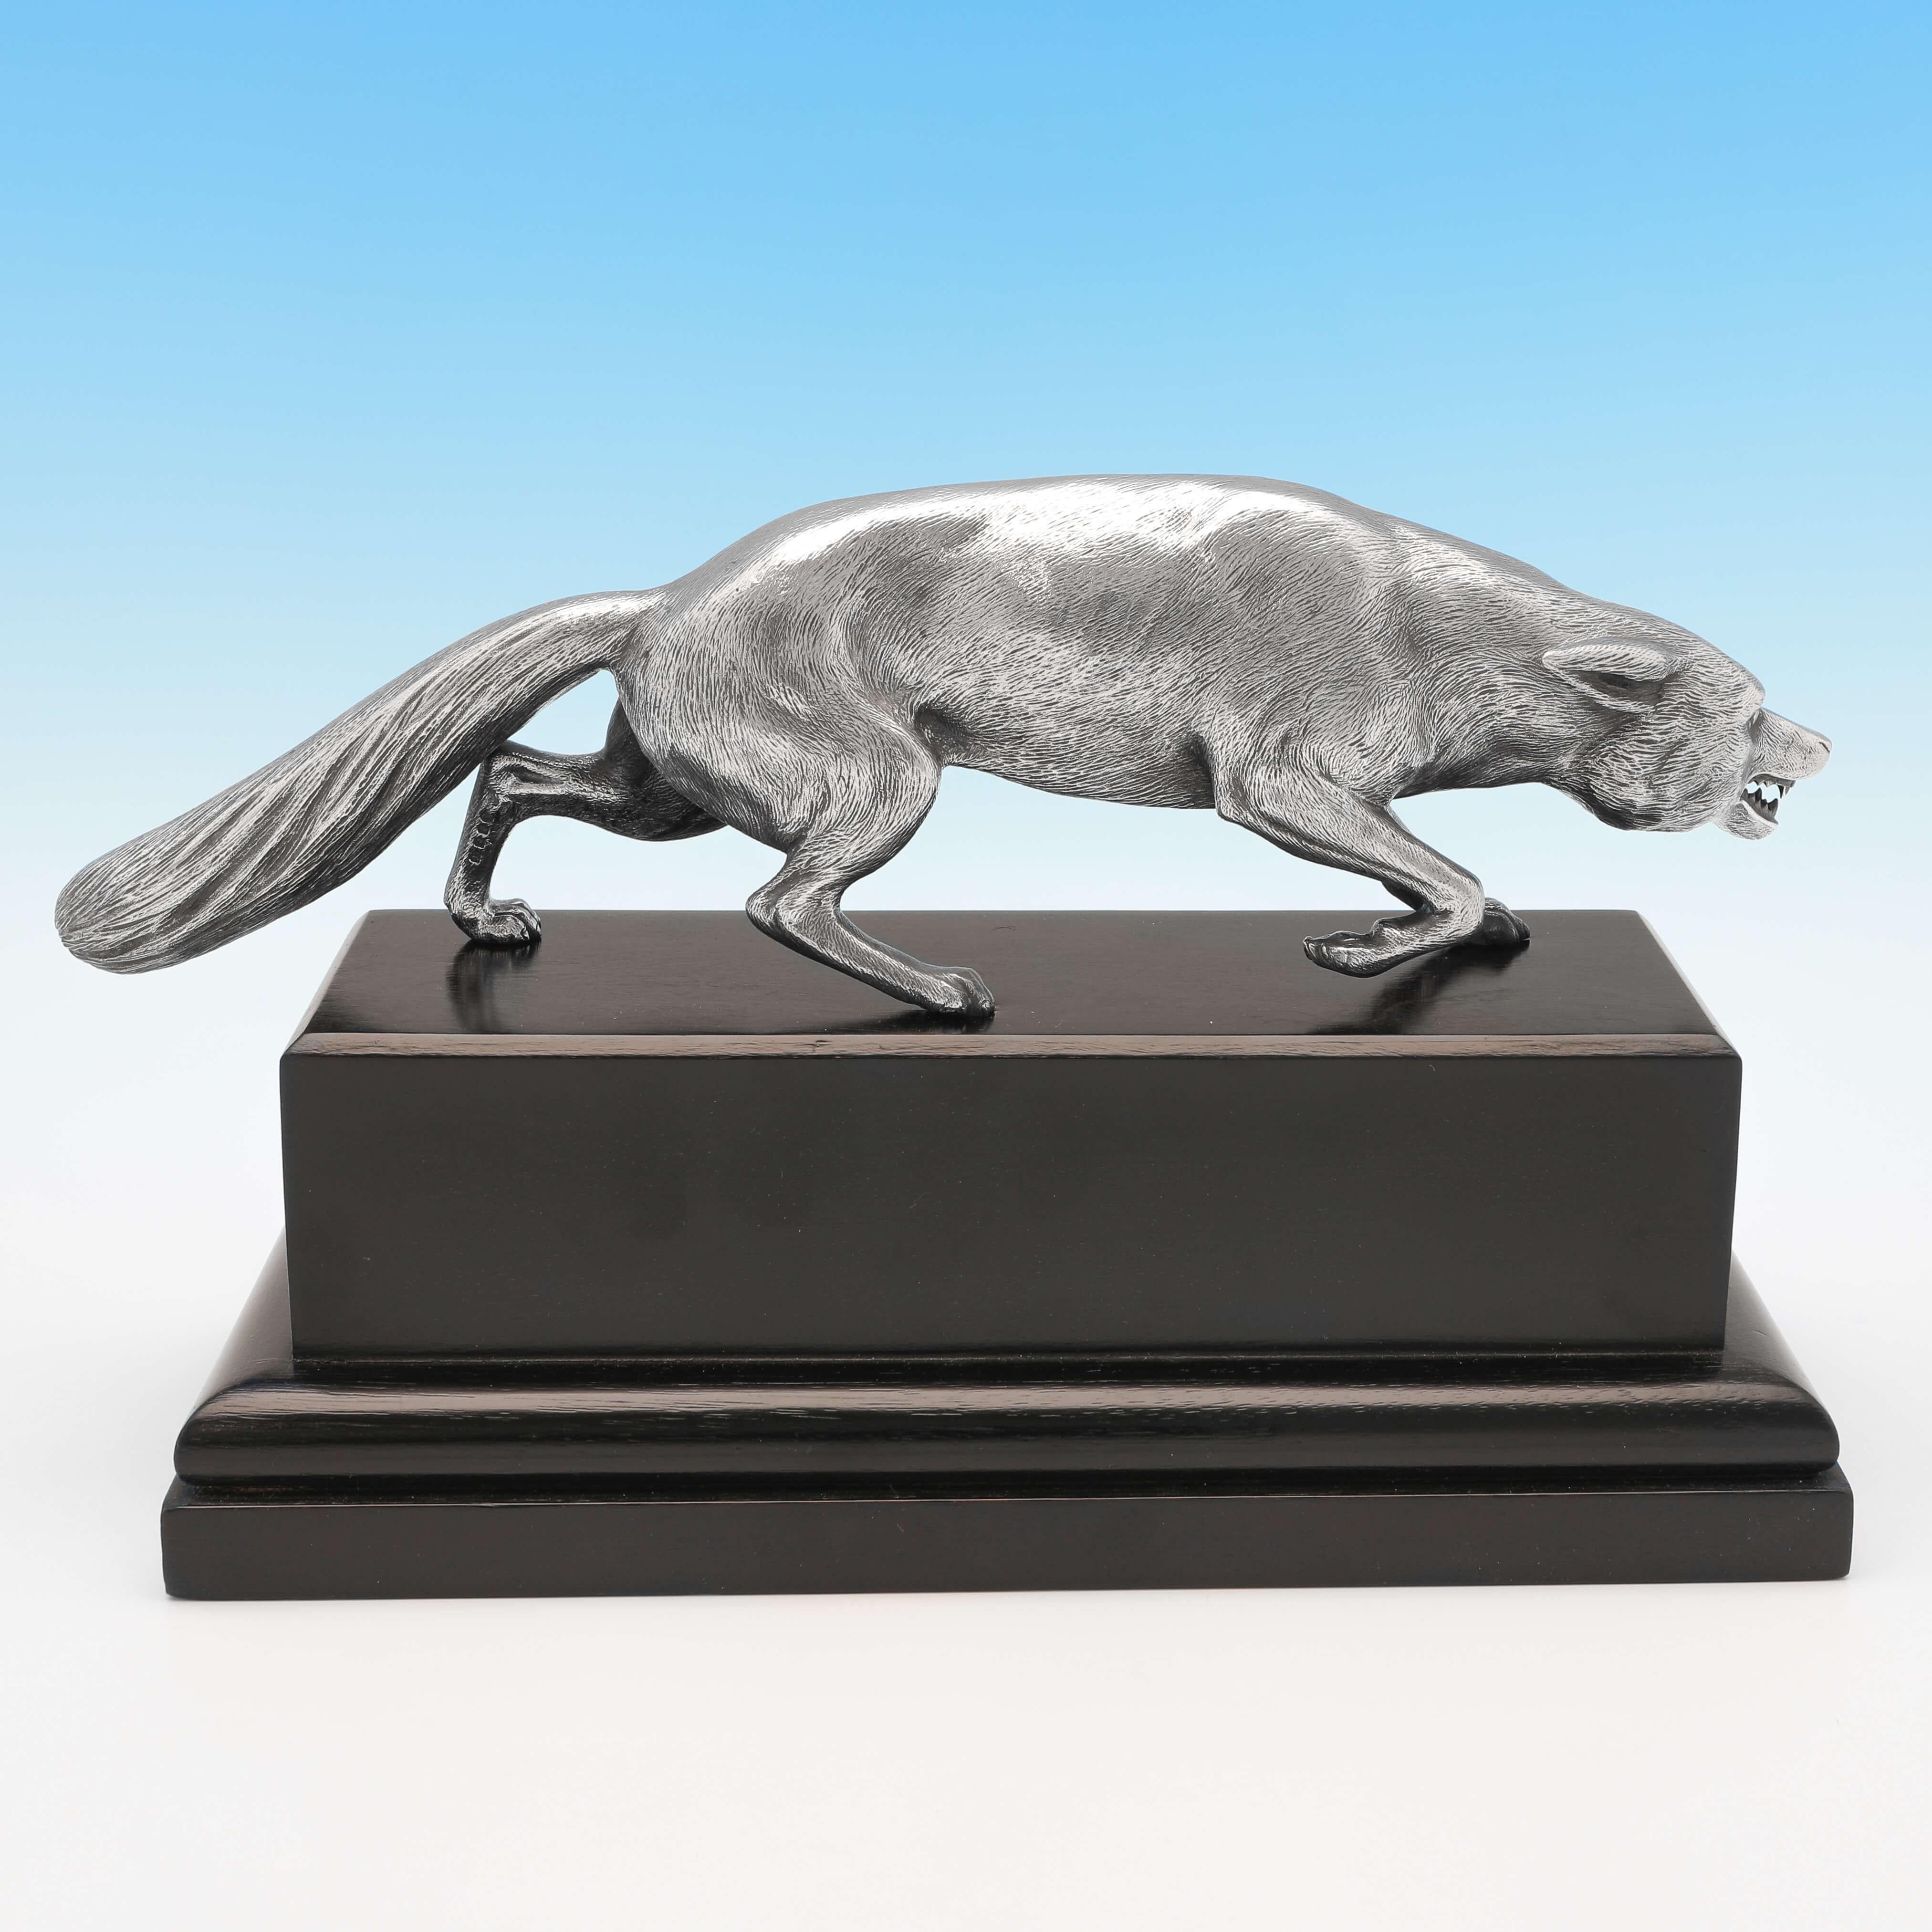 Hallmarked in London in 1935 by Goldsmiths & Silversmiths Co., this incredible, Sterling Silver Model of a Fox, is presented on a wooden plinth which has a vacant plaque, and is wonderfully modelled. The fox measures 13.5